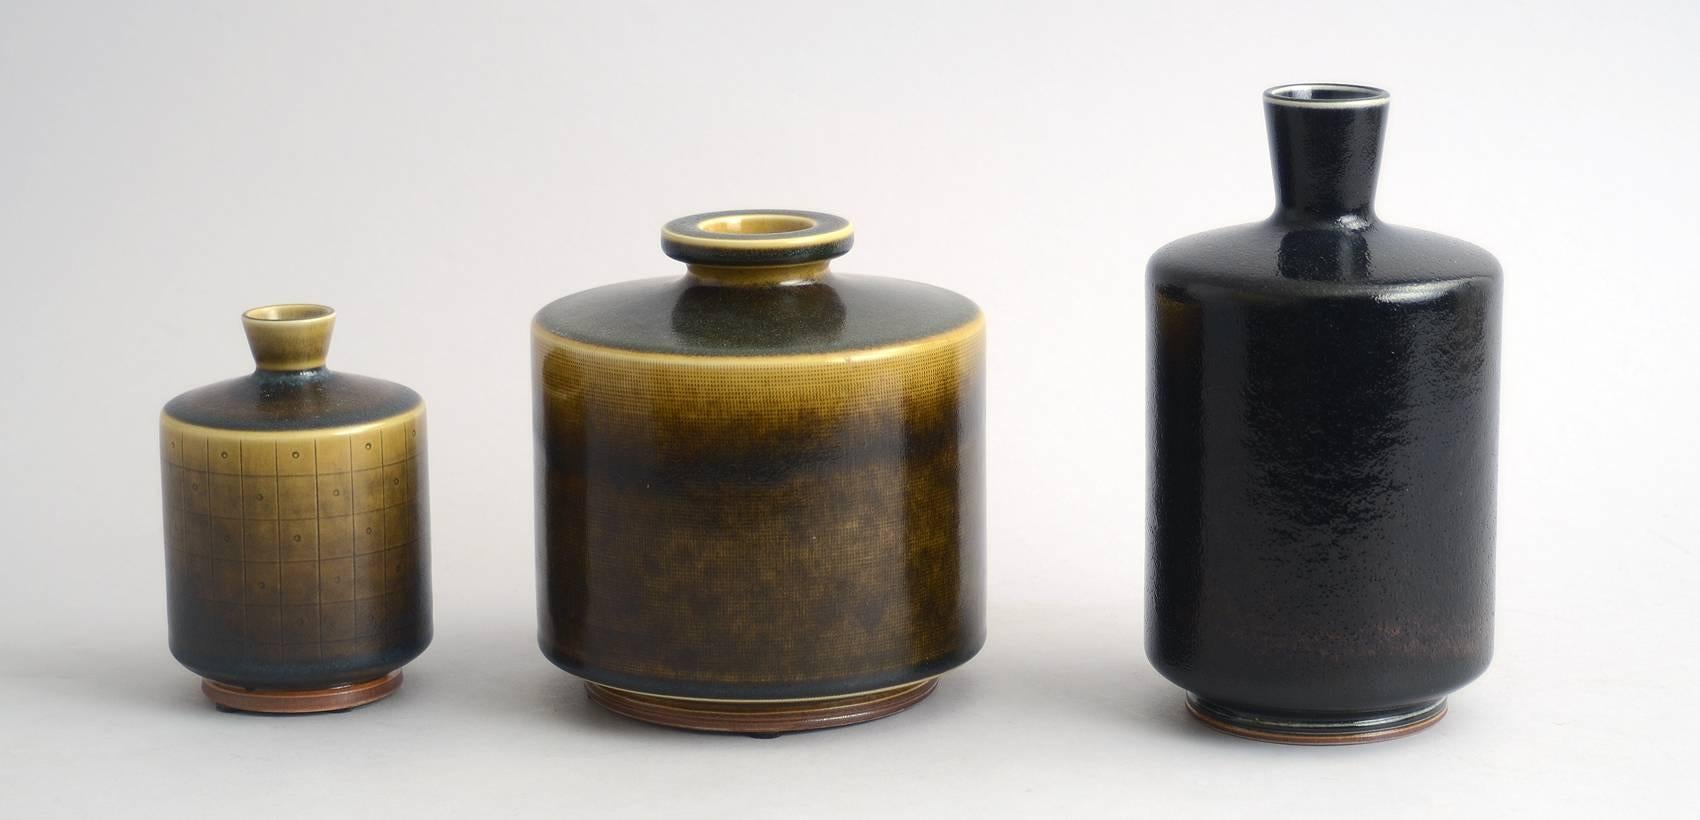 1. Unique stoneware vase with glossy pitted black glaze, 1965.
Height 7 1/4" (18.5 cm) Width 4" (10 cm)  No. N2591 
2. Unique stoneware bottle vase with glossy yellow and black glaze, with a grid pattern to body, 1962.
Height 4